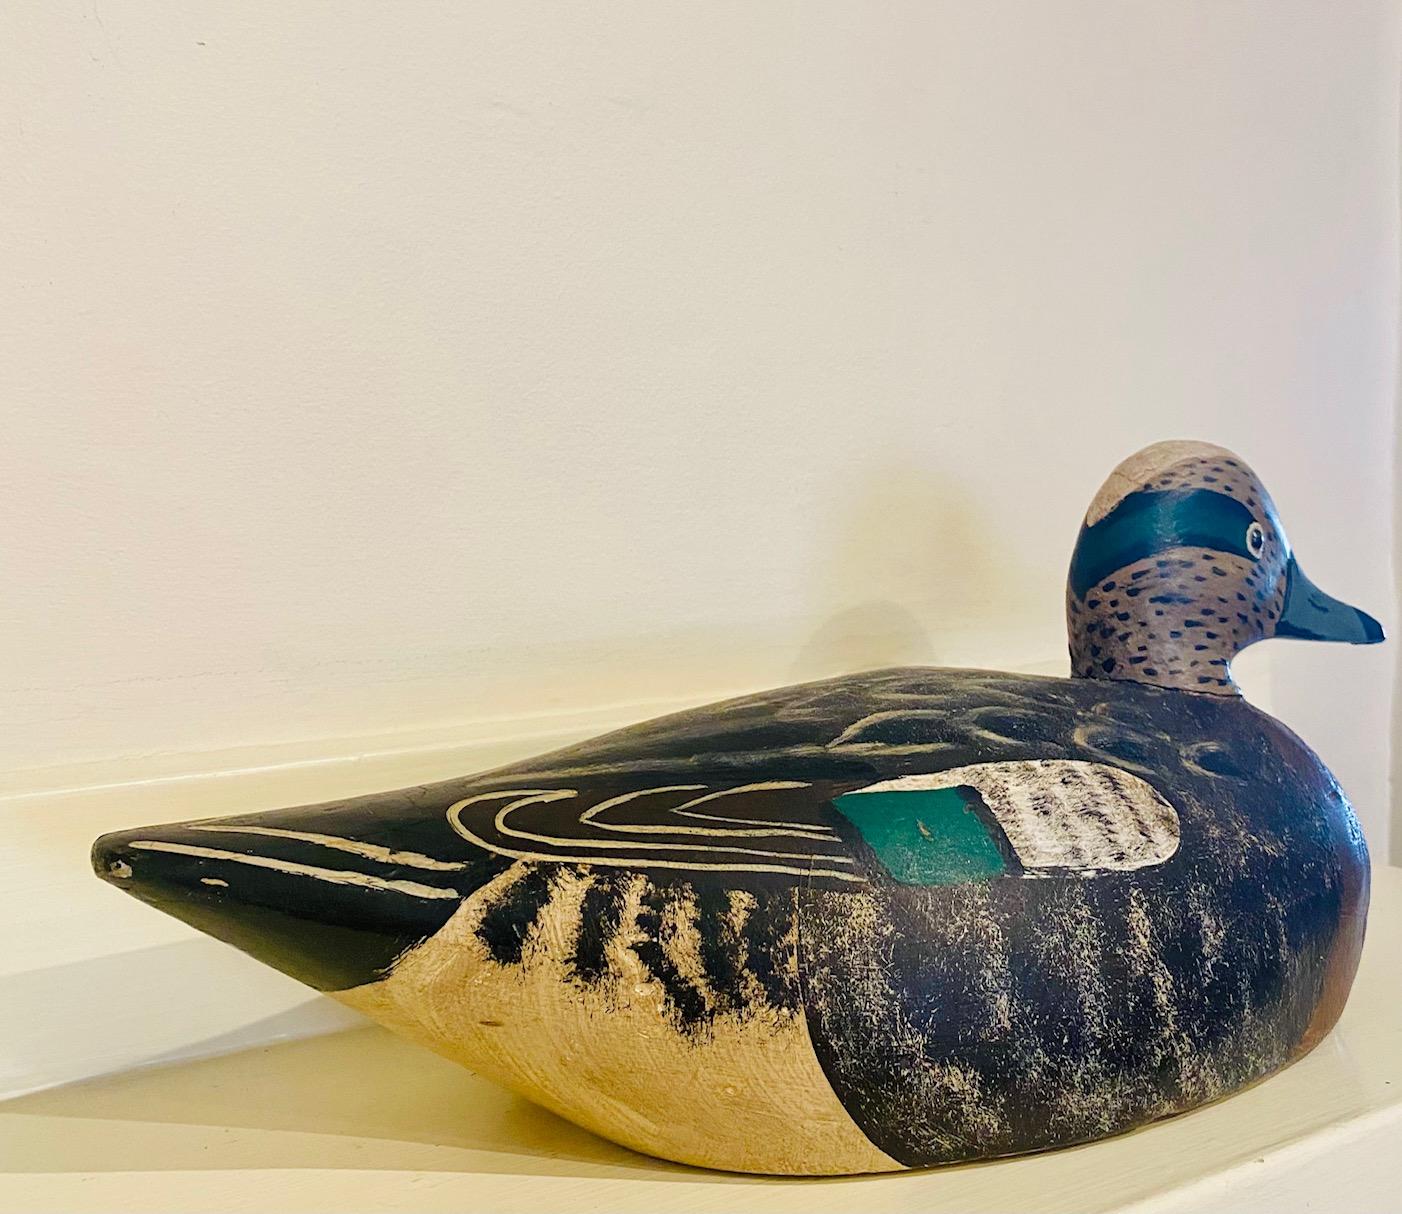 Antique Widgeon Drake Decoy, circa 1940, by J. Elmer Crowell, East Harwich, MA (1862 - 1952), a hand carved and painted Widgeon or Baldpate drake decoy, signed with Crowell's rectangular stamp on the bottom.

Retains much of the original paint